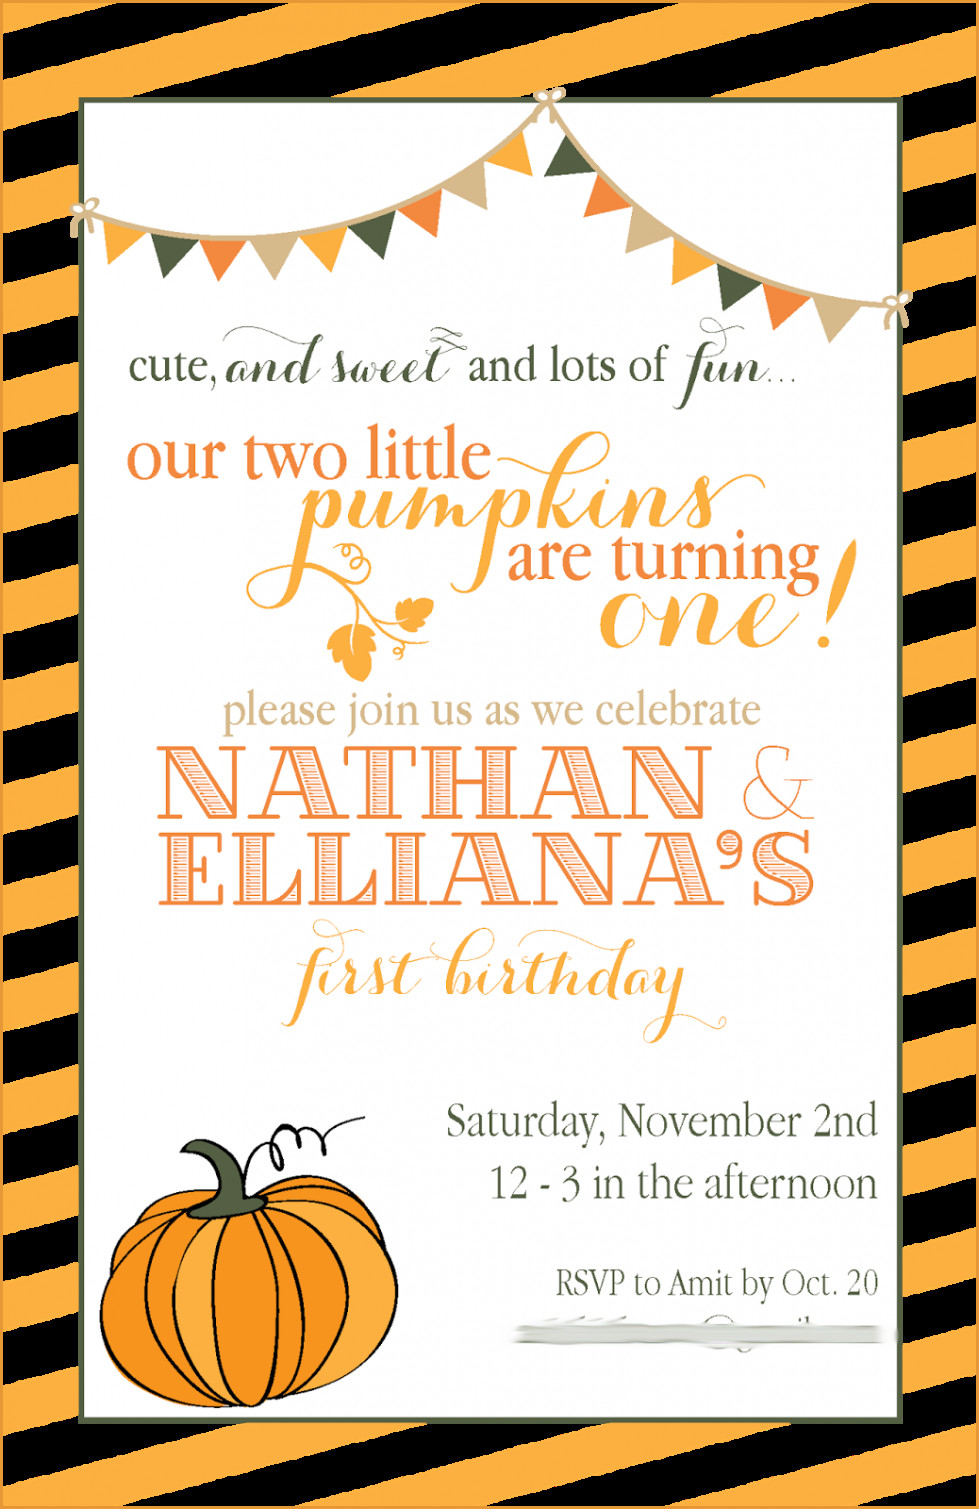 Party Invitations: Appealing Fall Party Invitations Ideas Fall Party - Free Printable Fall Festival Invitations